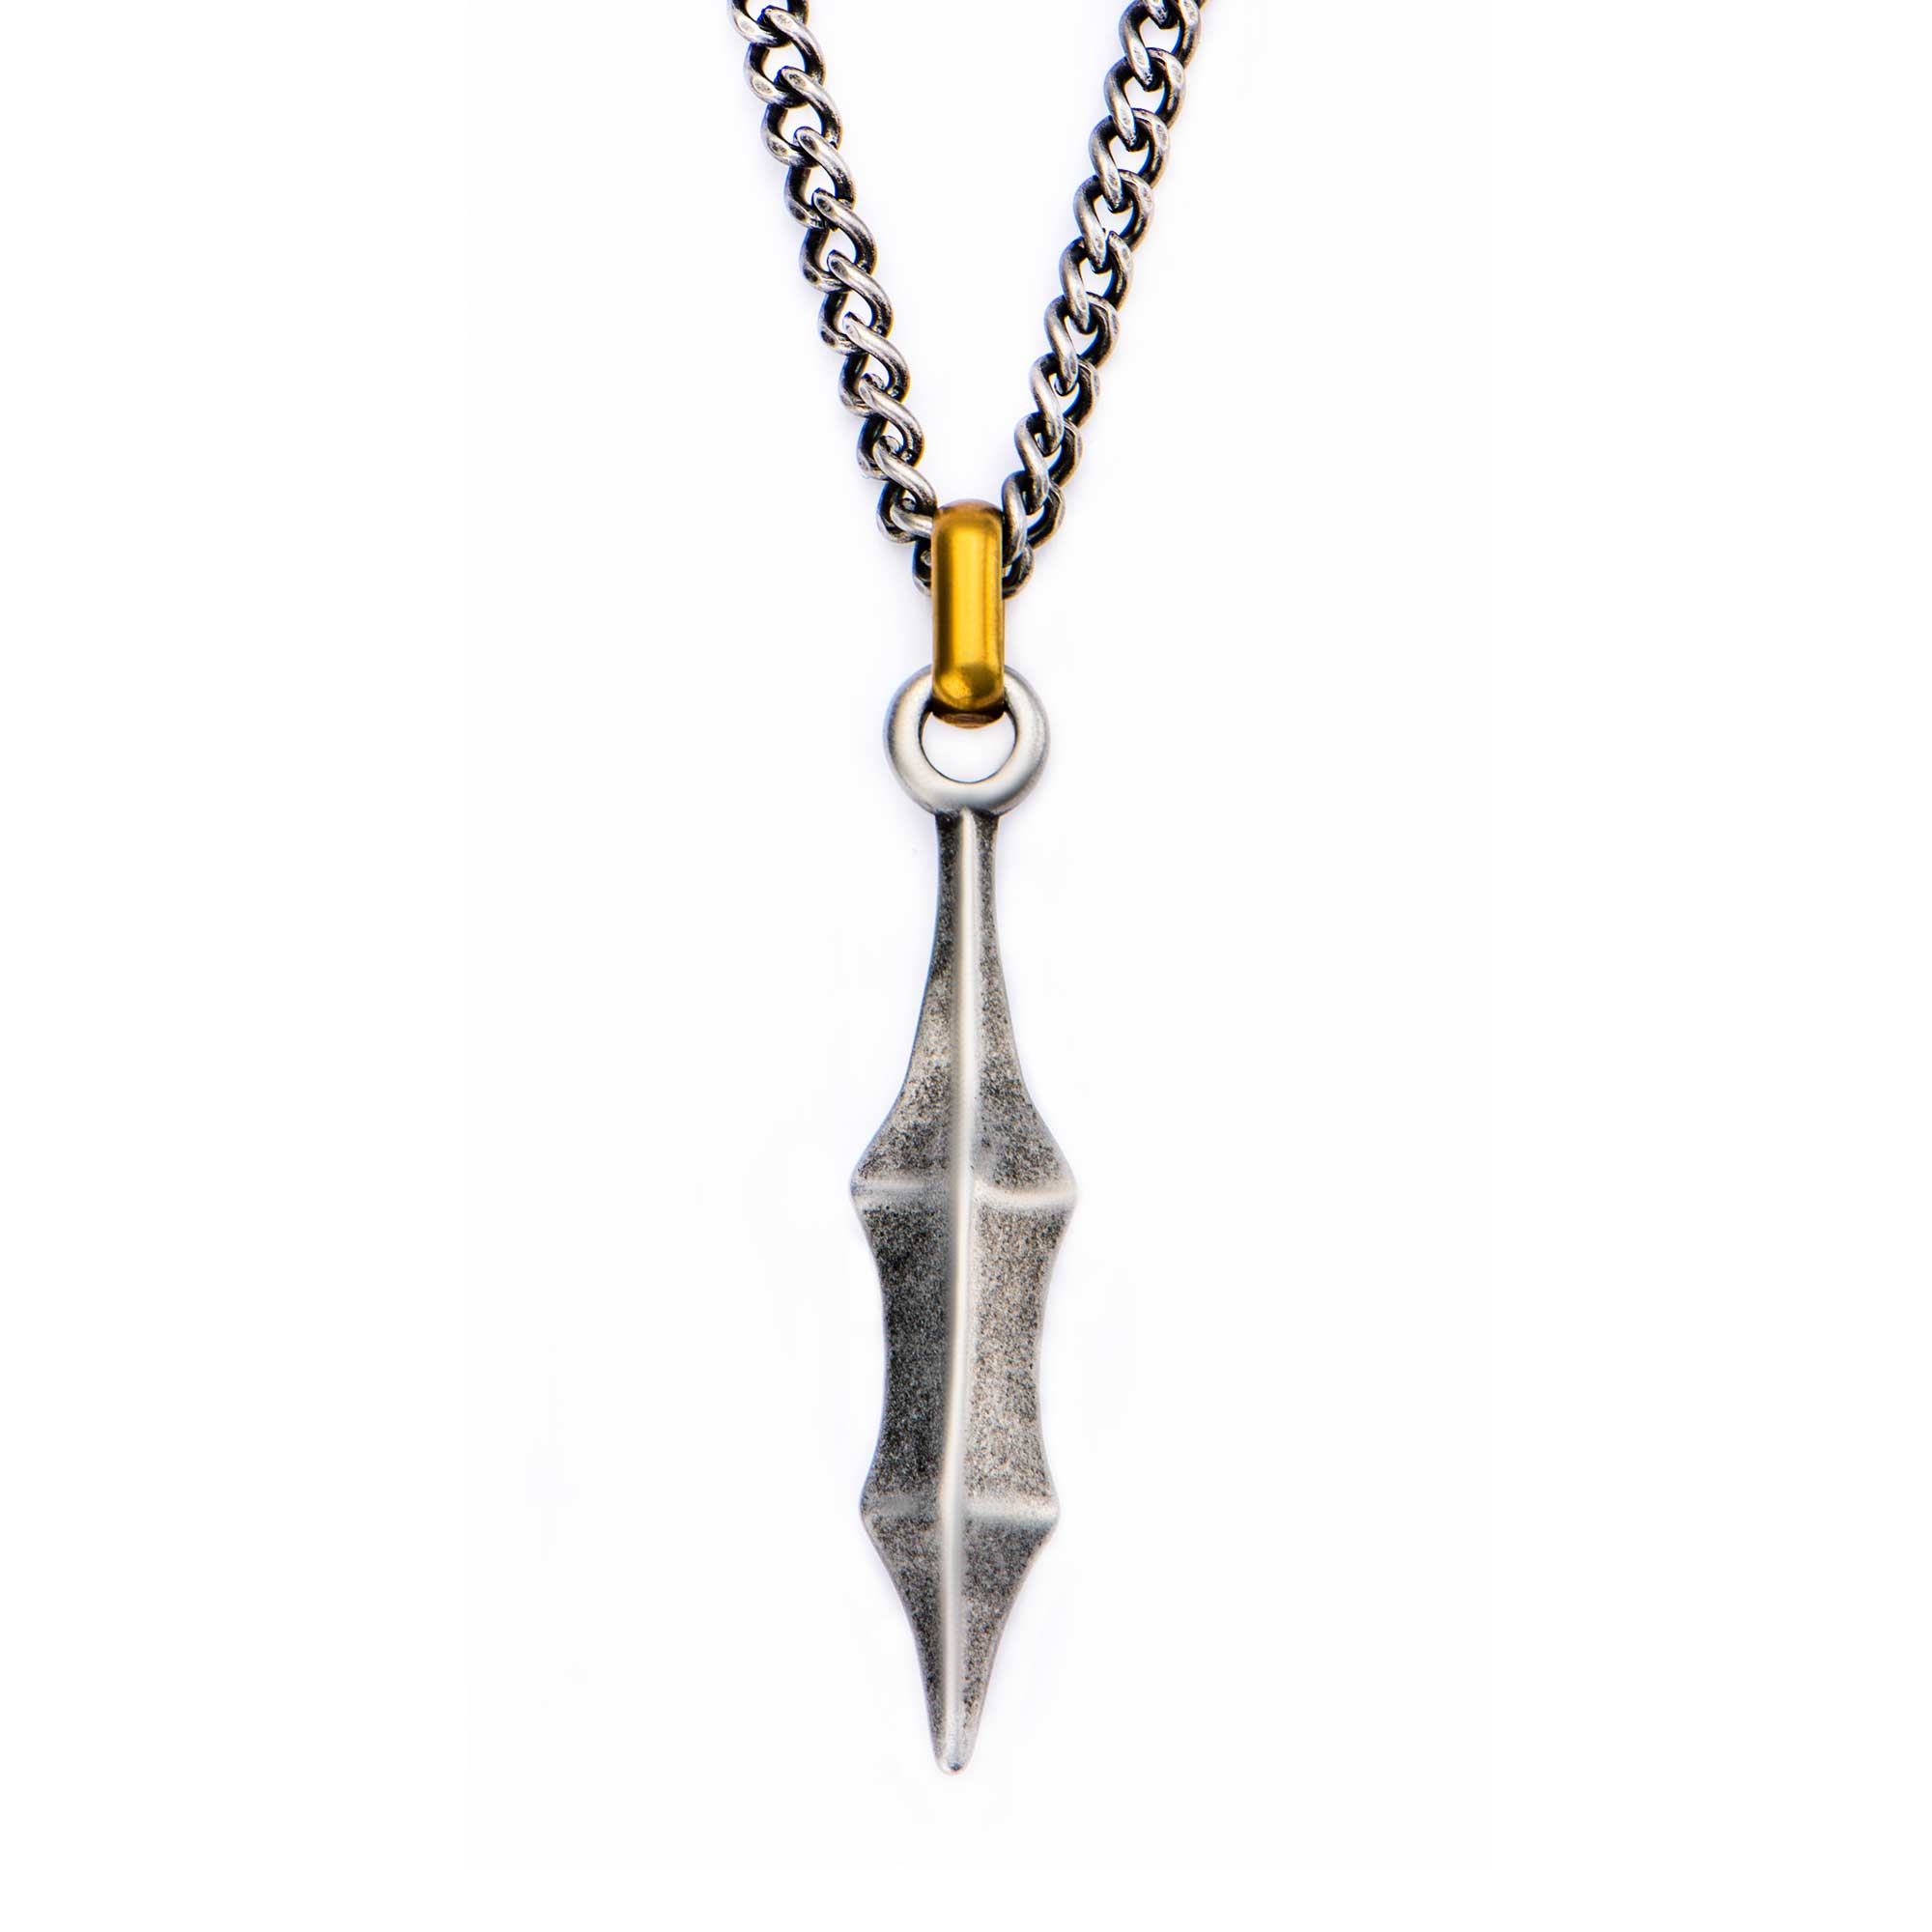 Antique Finish with an Antiqued Gold Plated Bail Medieval Blade Pendant Ken Walker Jewelers Gig Harbor, WA